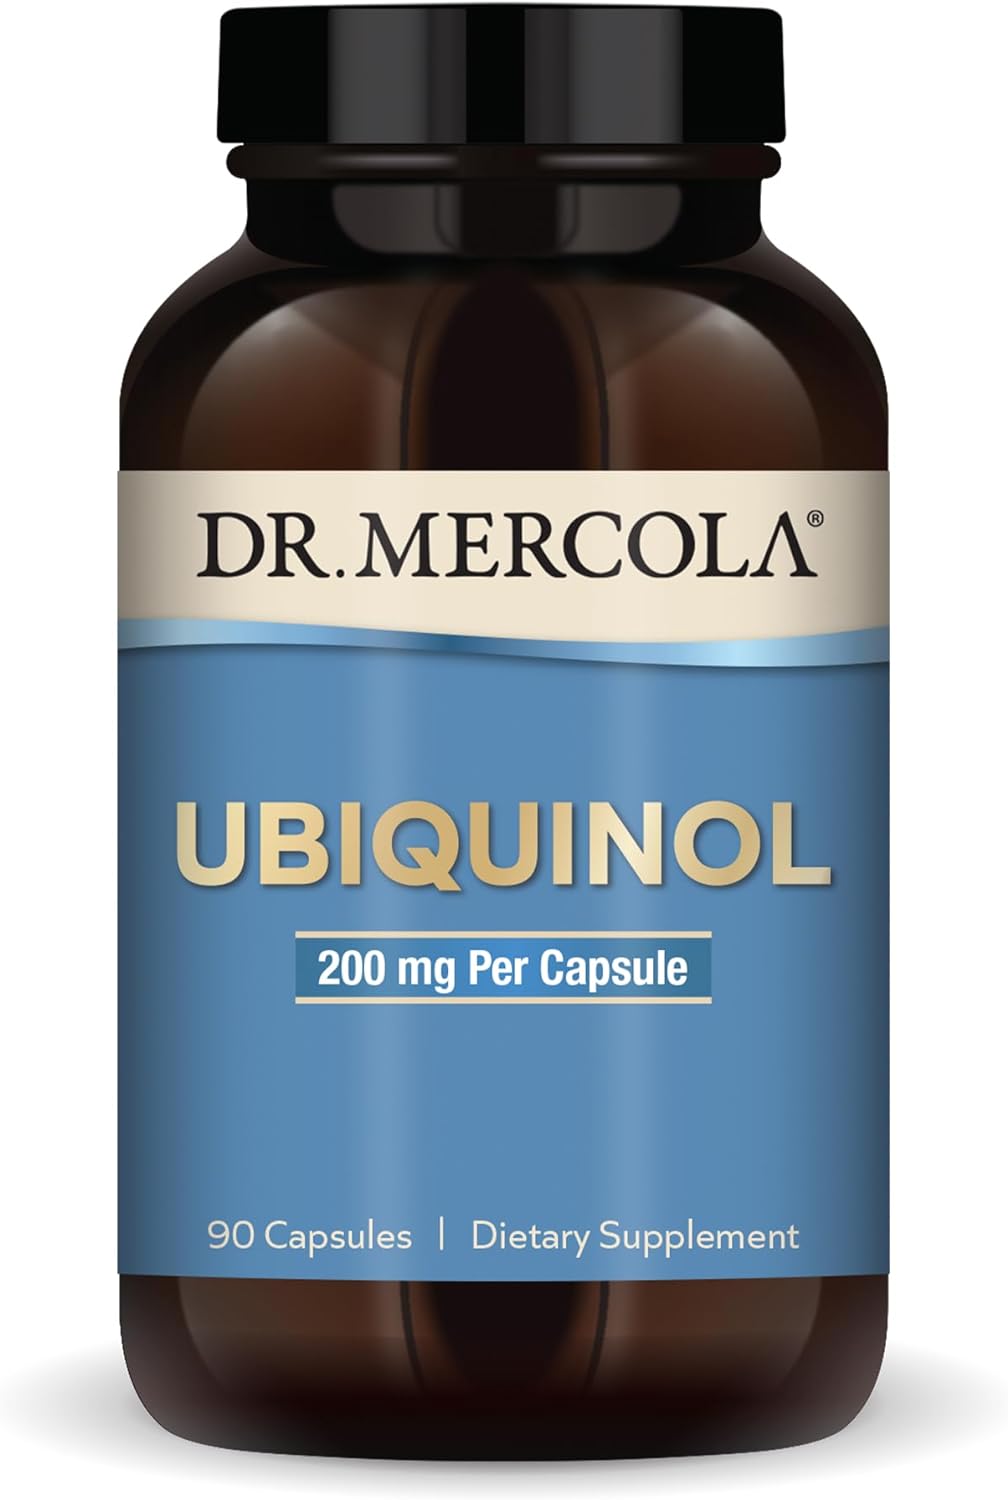 Dr. Mercola Ubiquinol, 90 Servings (90 Capsules), 200 mg Per Capsule, Dietary Supplement, Supports Energy Production, Non-GMO